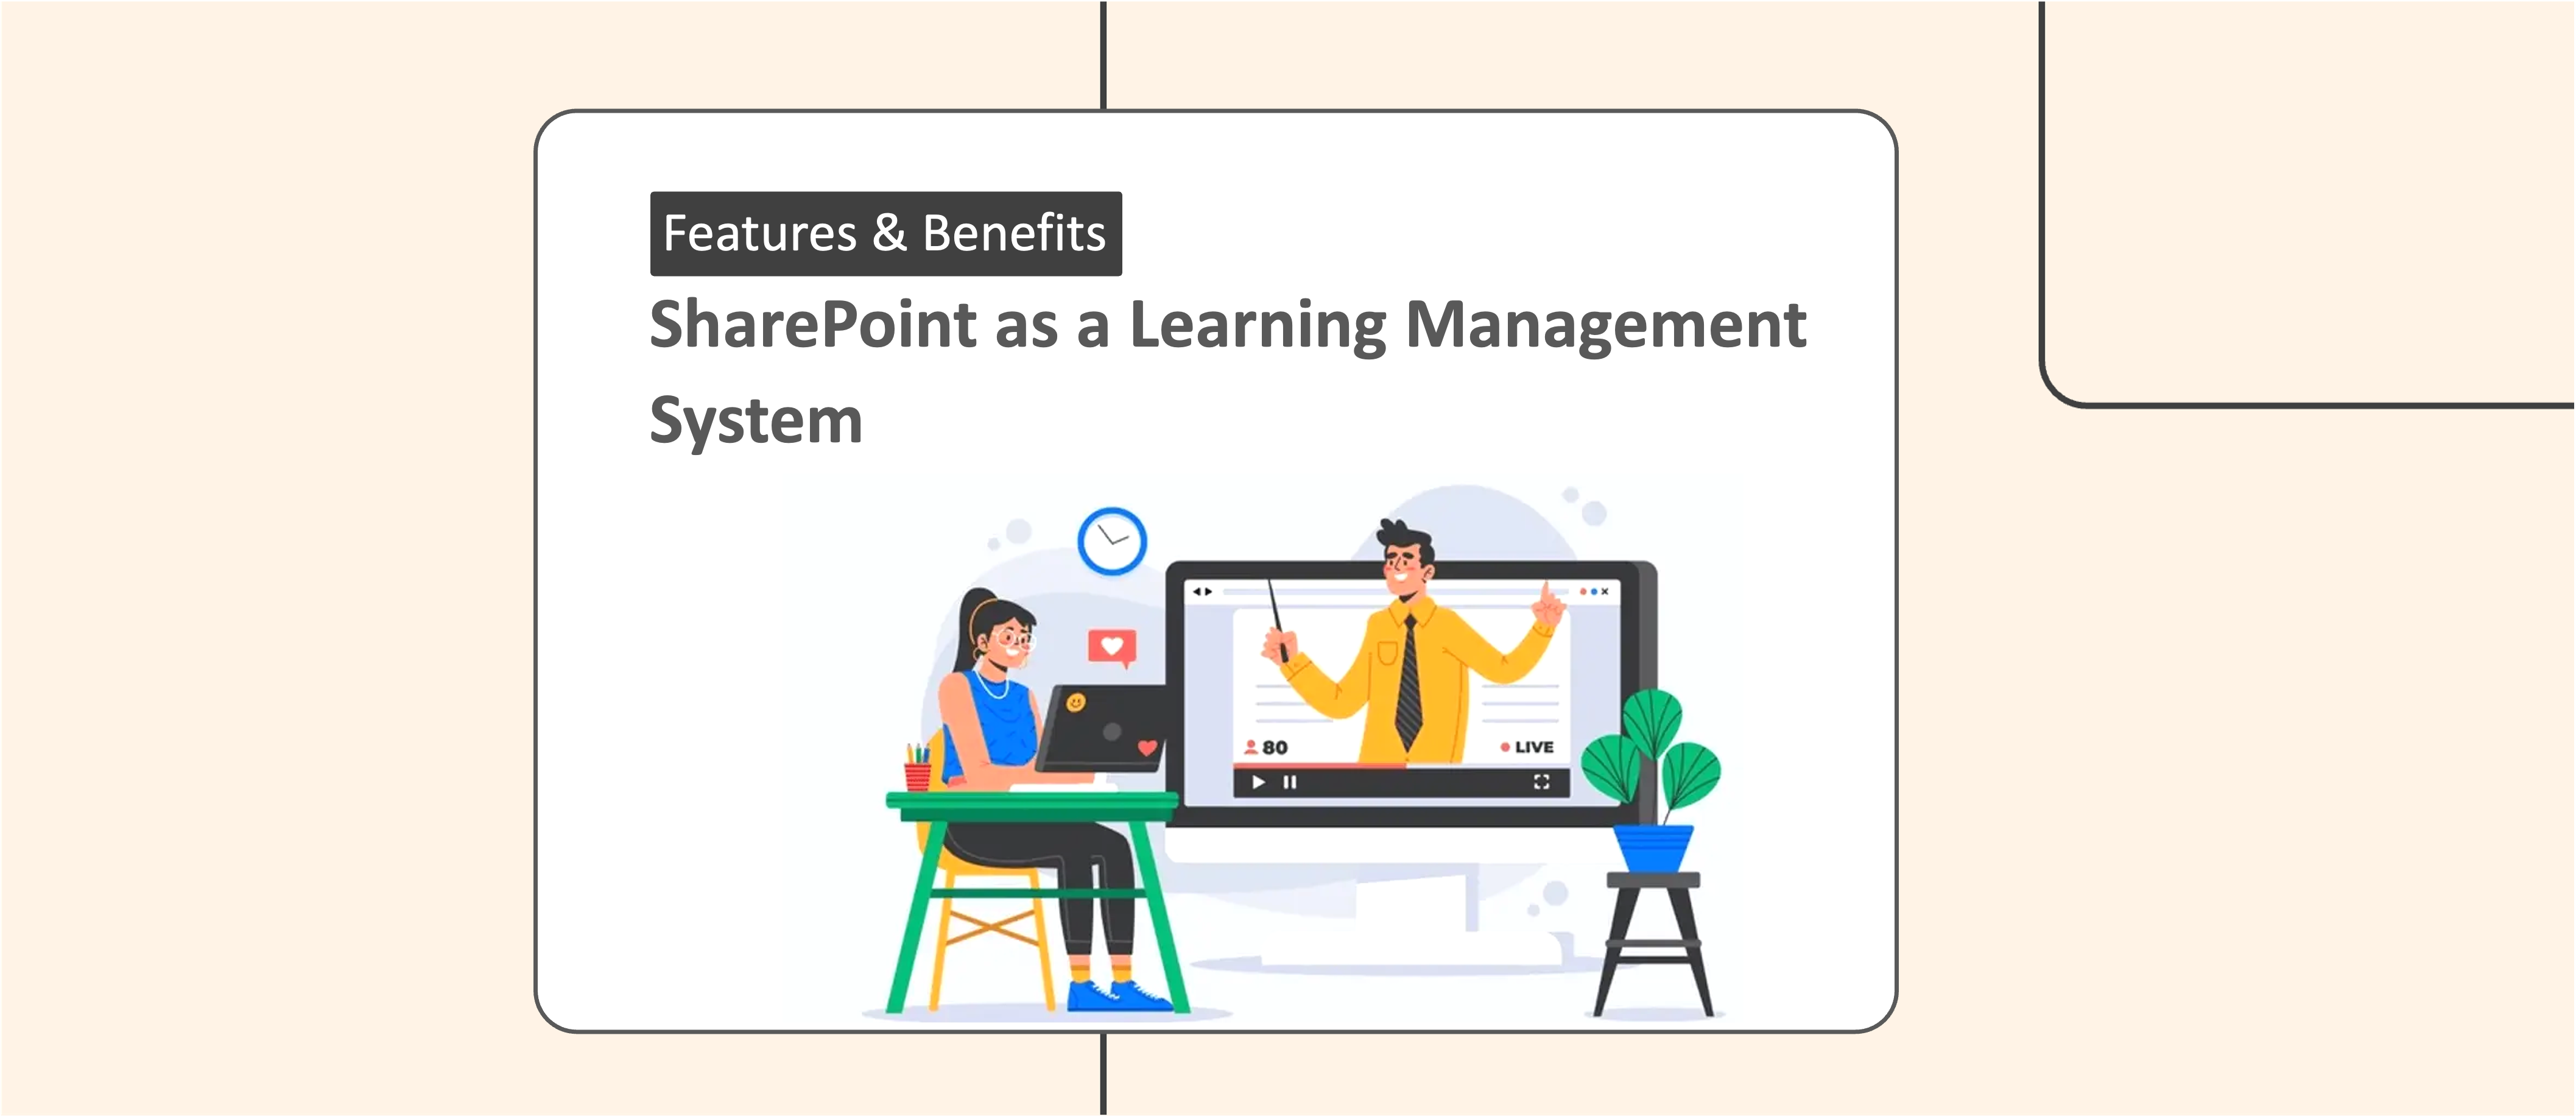 SharePoint as a Learning Management System: Features and Benefits